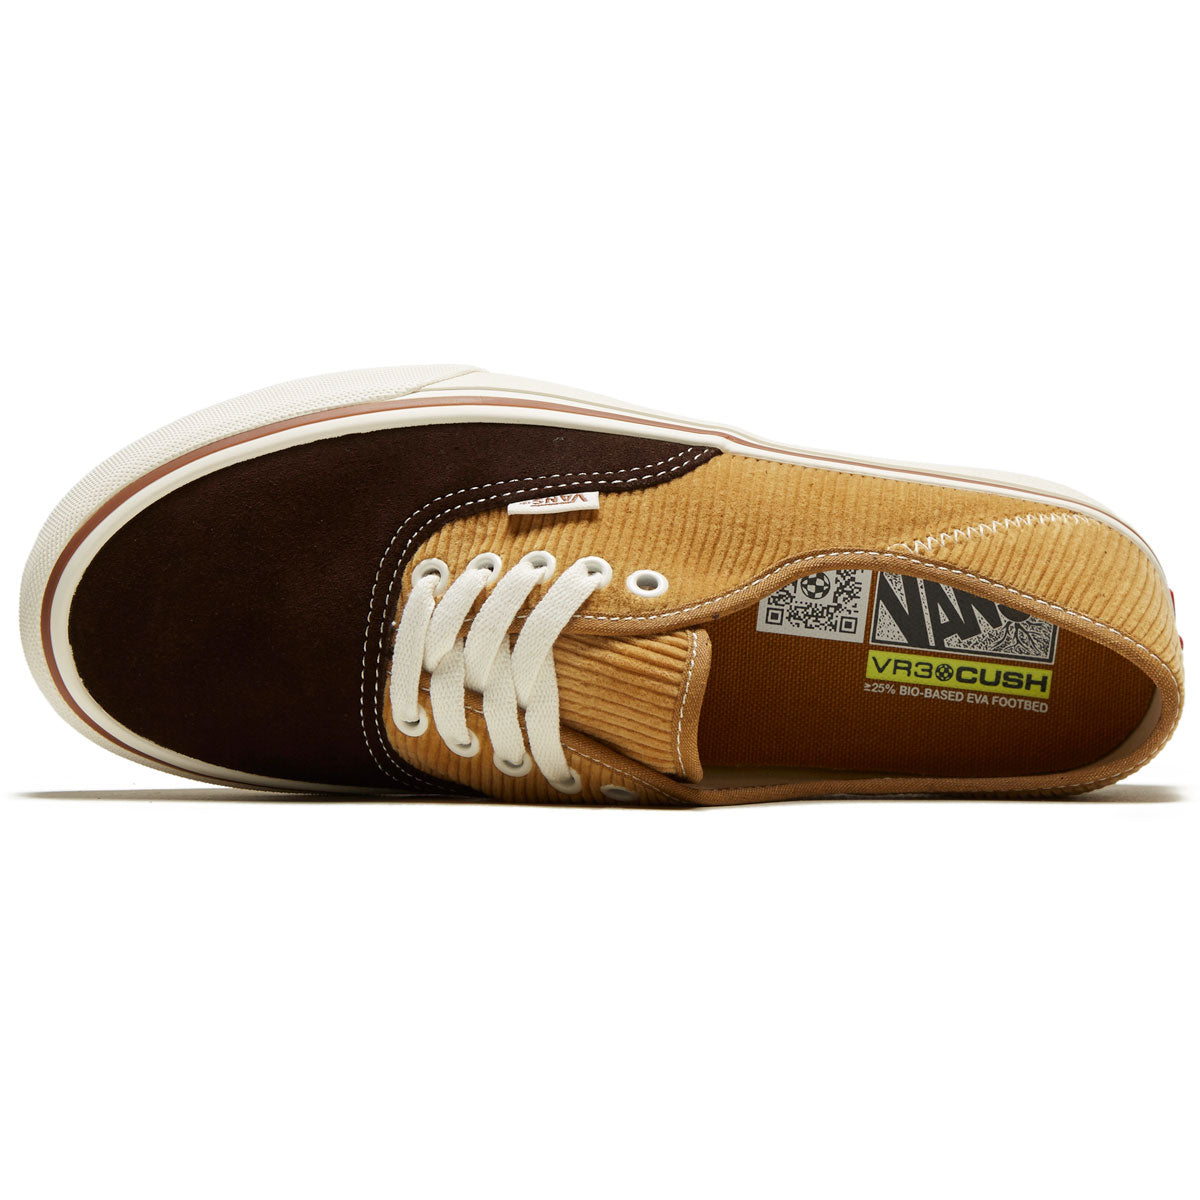 Vans Authentic VR3 Sf Shoes - Mustard Gold image 3